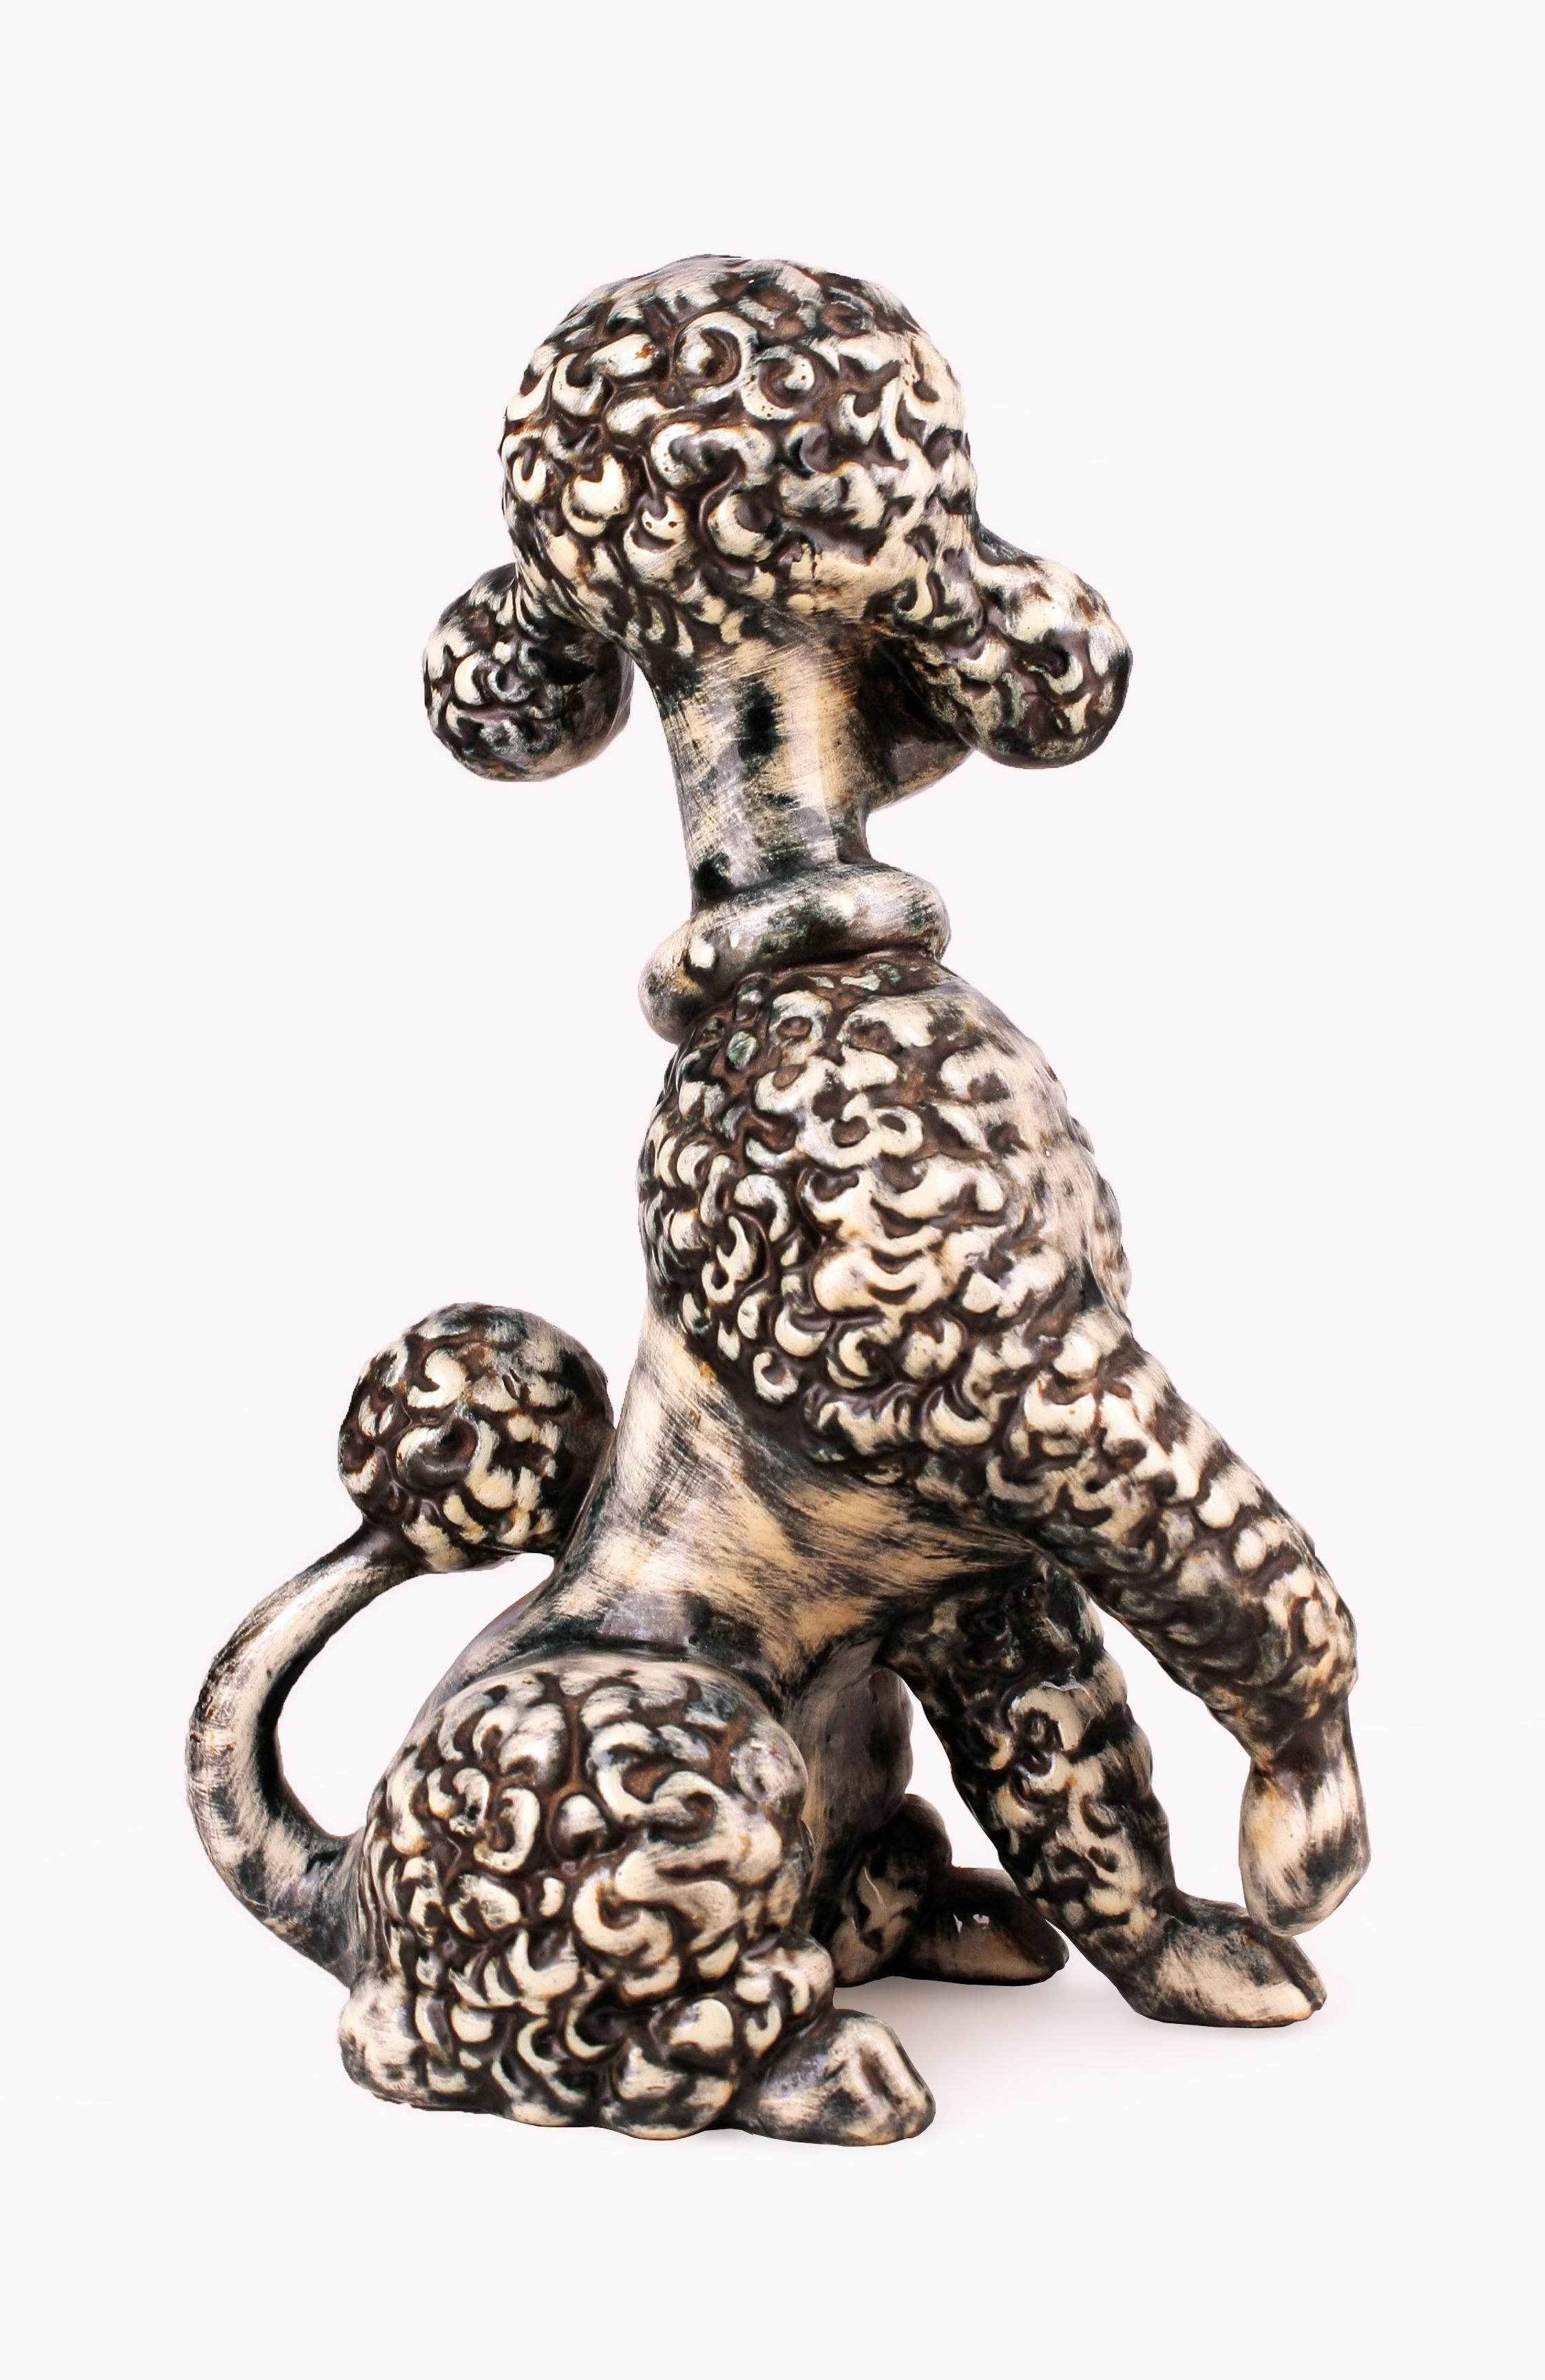 Unglazed 20th Century French Painted Ceramic Figure of a Poodle/Dog by Atelier Primavera For Sale